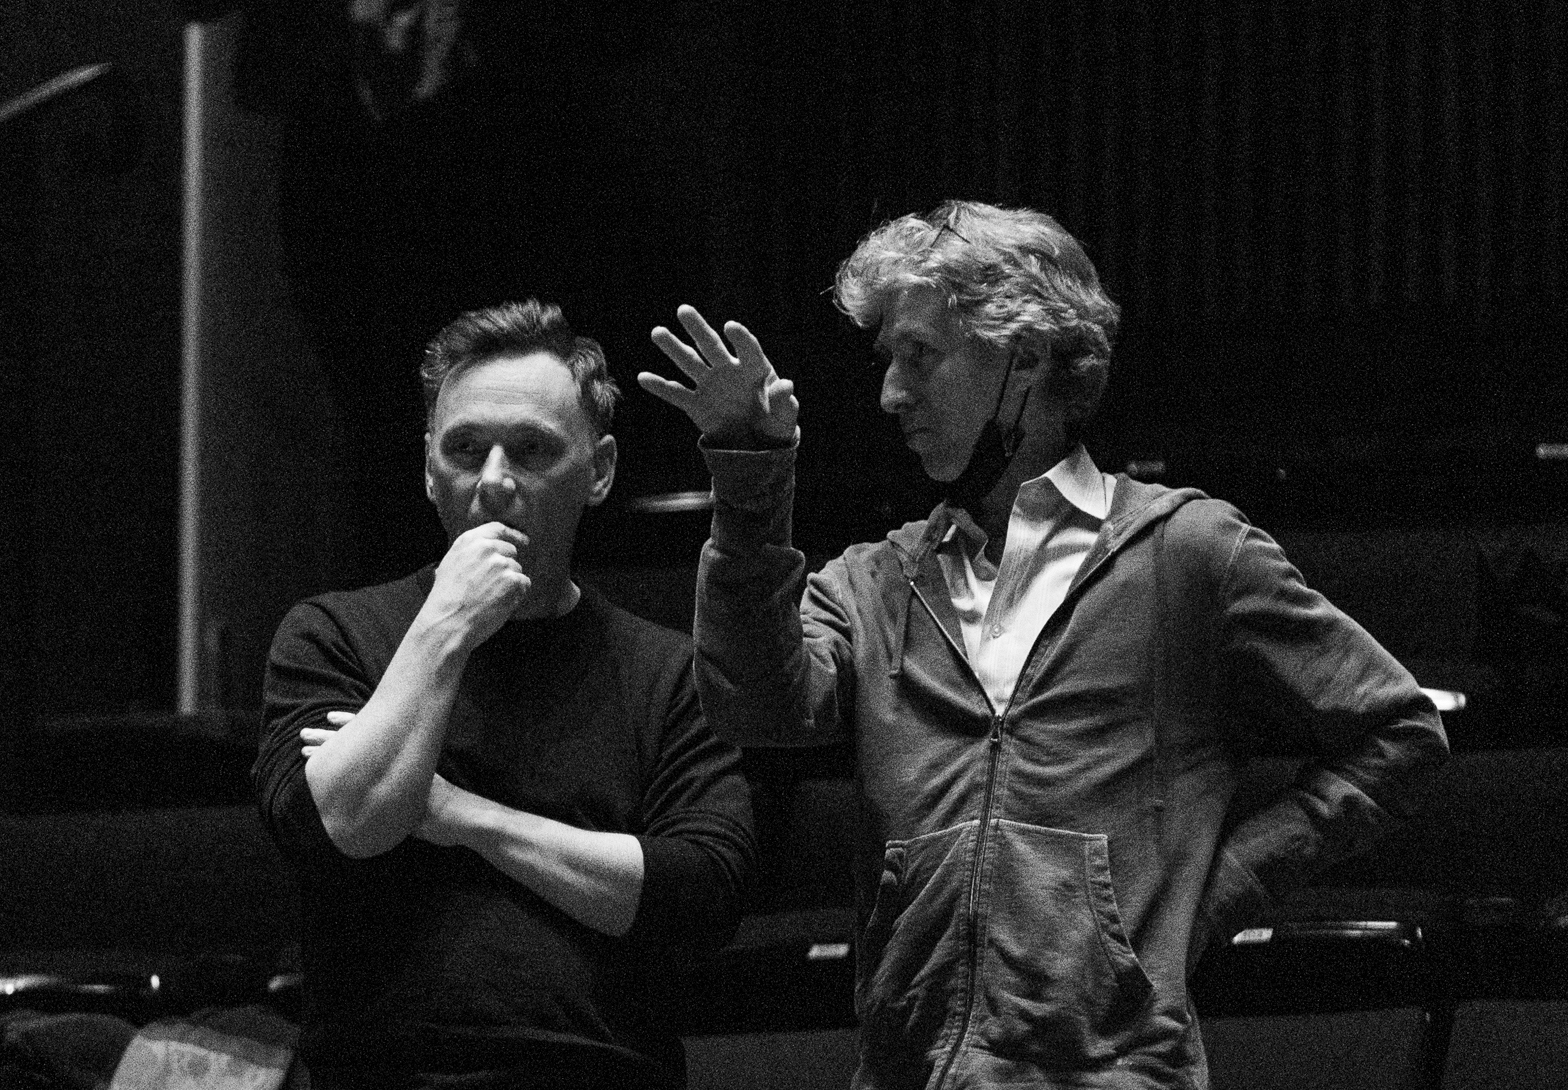 Larry Keigwin and Damian Woetzel in a candid black and white photo taken during rehearsal